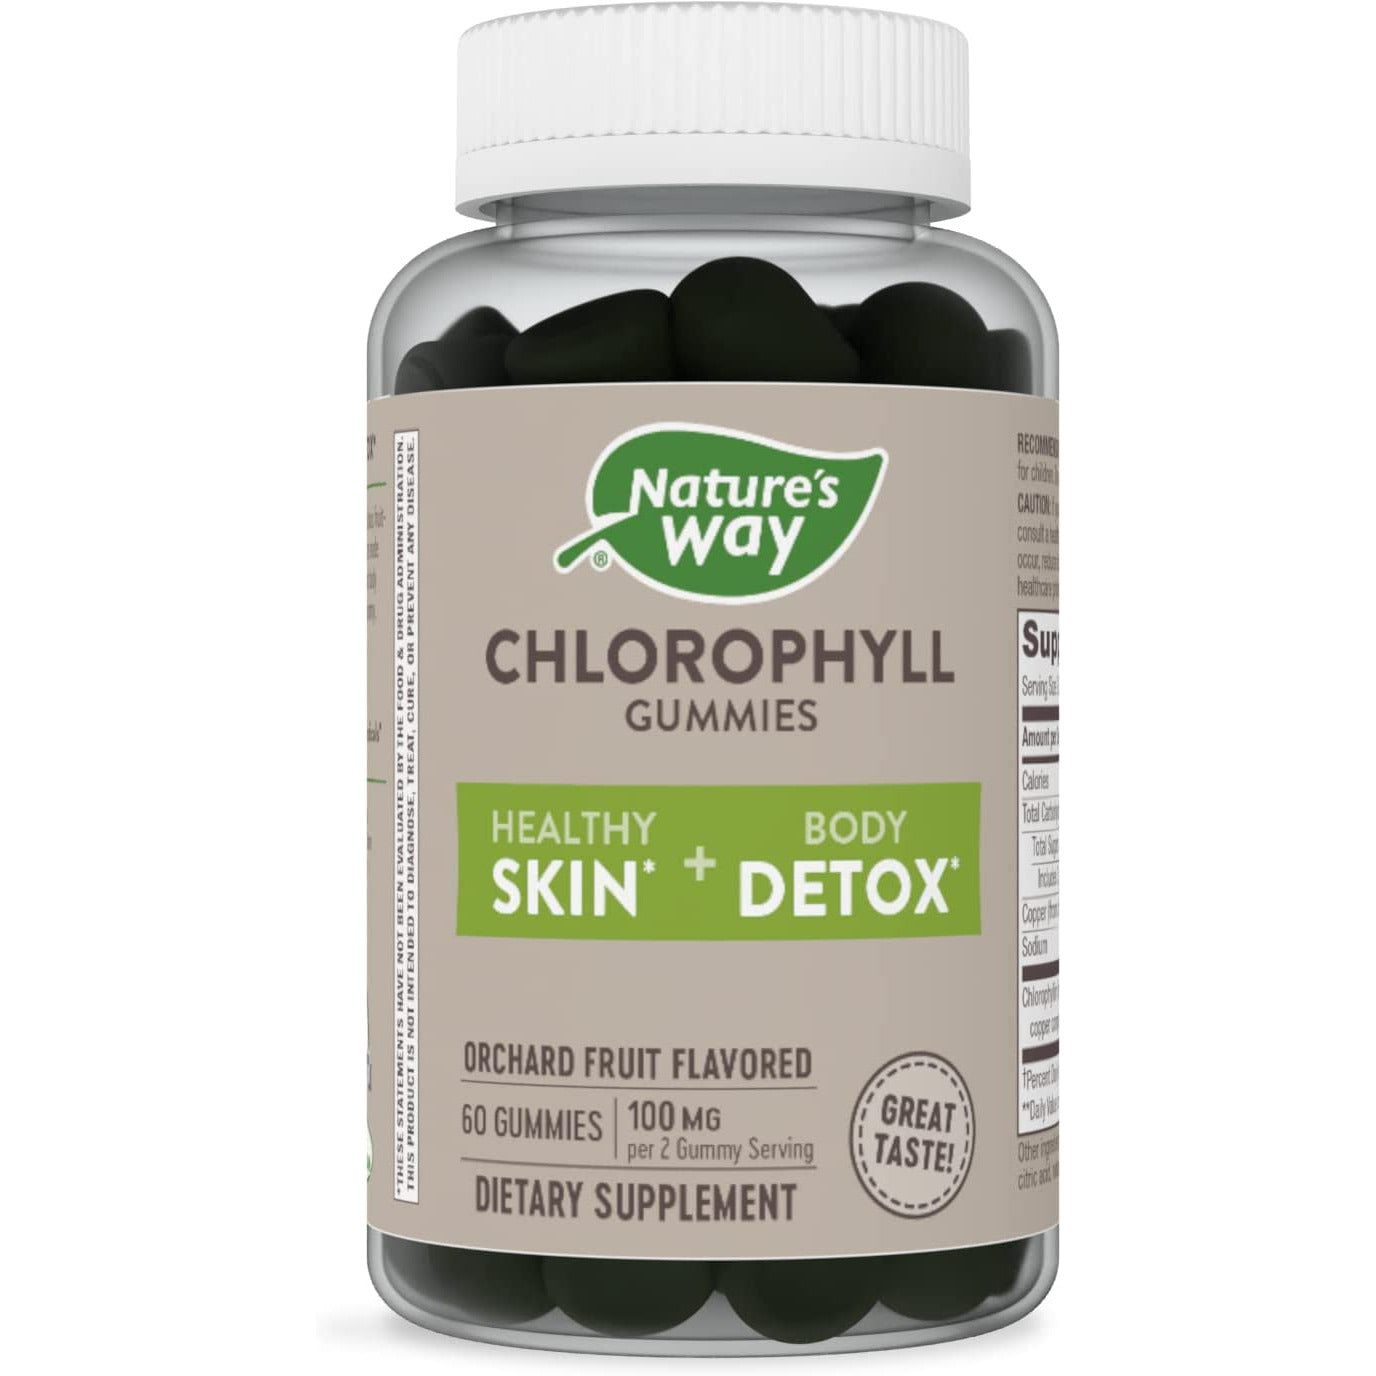 Nature's Way Chlorophyll Gummies, Healthy Skin and Body Detox